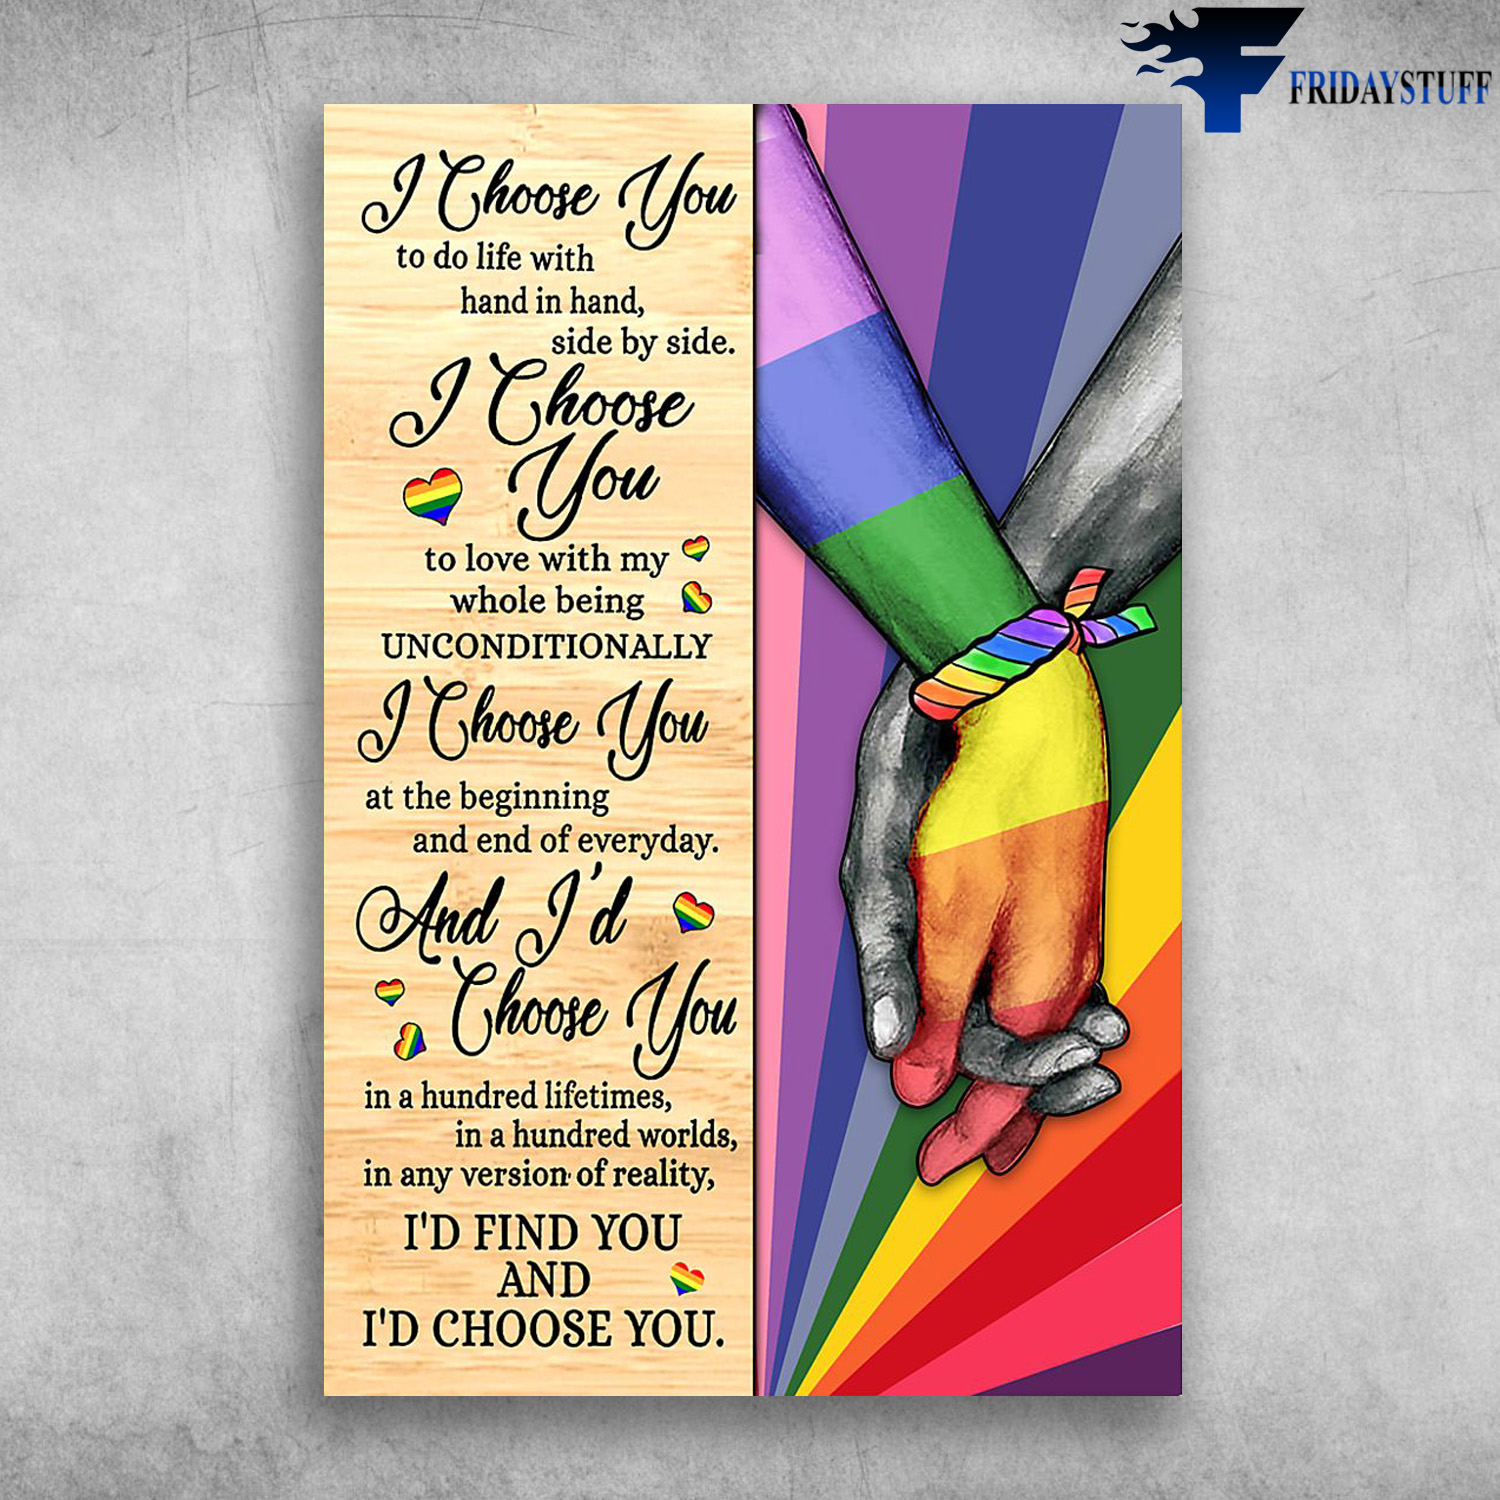 The LGBT - I Choose You To Do Life With Hand In Hand, Side By Side, I Choose You To Love With My Whole Being Unconditionally, I Choose You At The Beginning And End Of Everyday, And I Choose You In A Hundred Lifetimes, In A Hundred Worlds